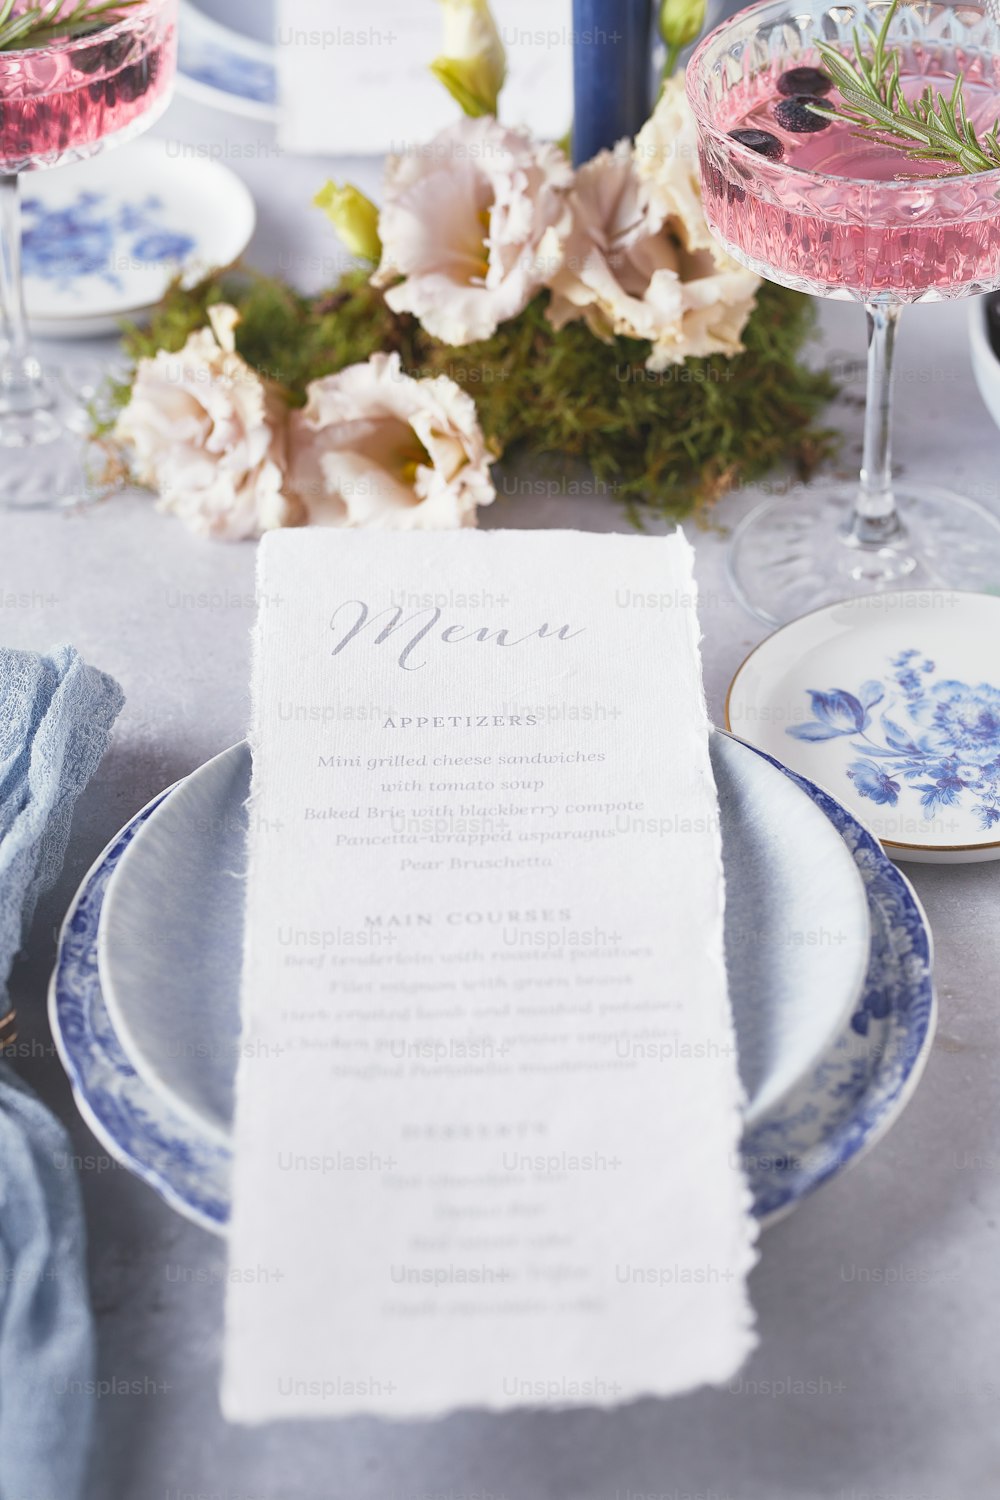 a close up of a menu on a table